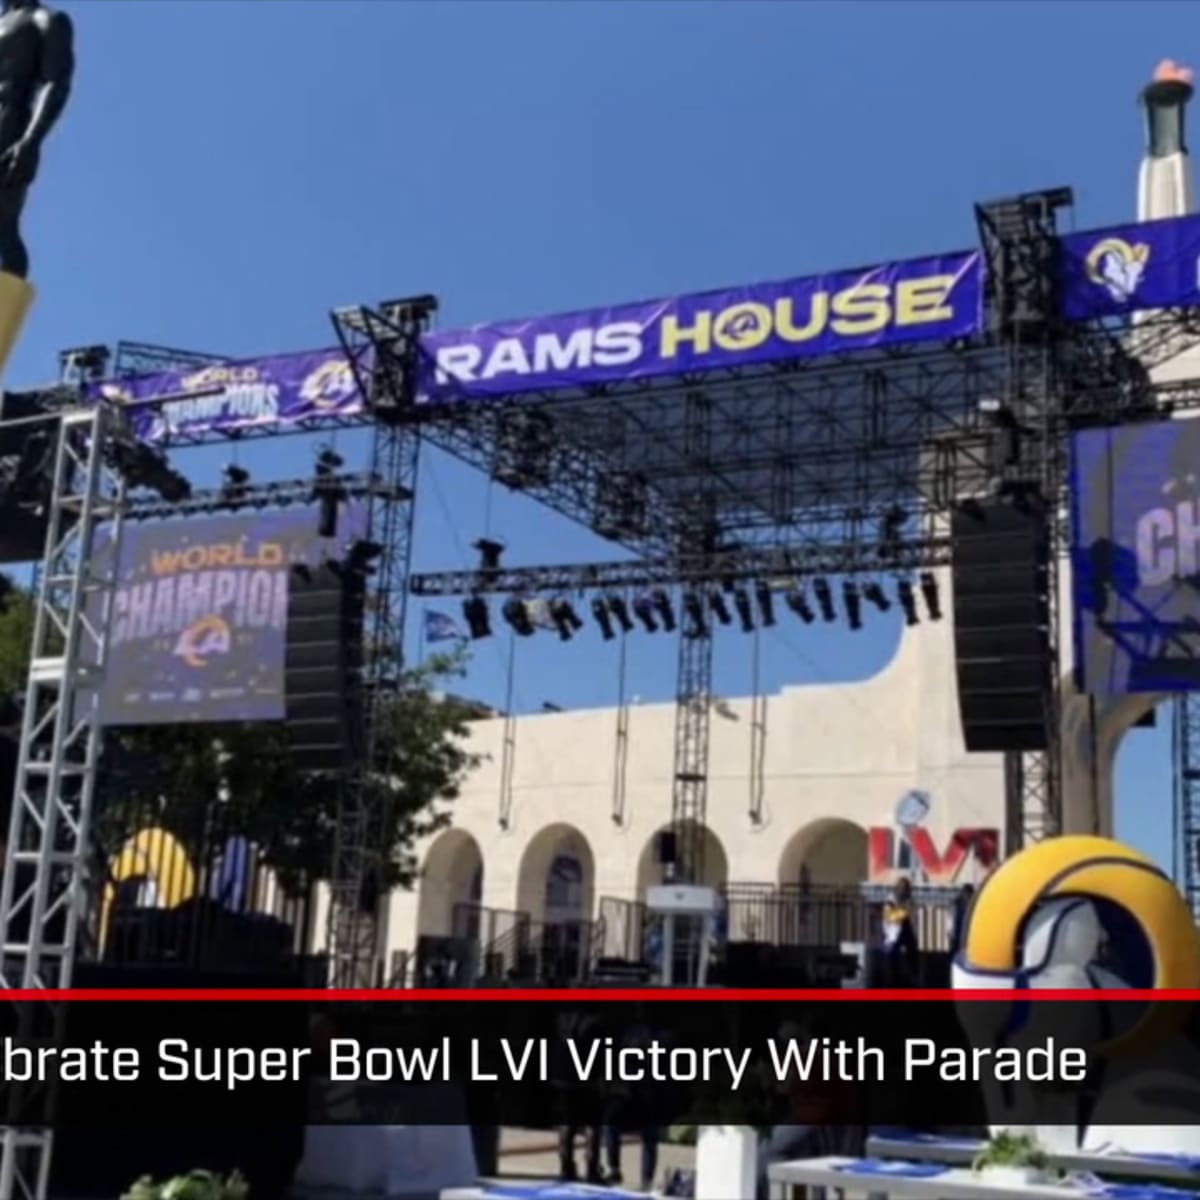 rams super bowl experience